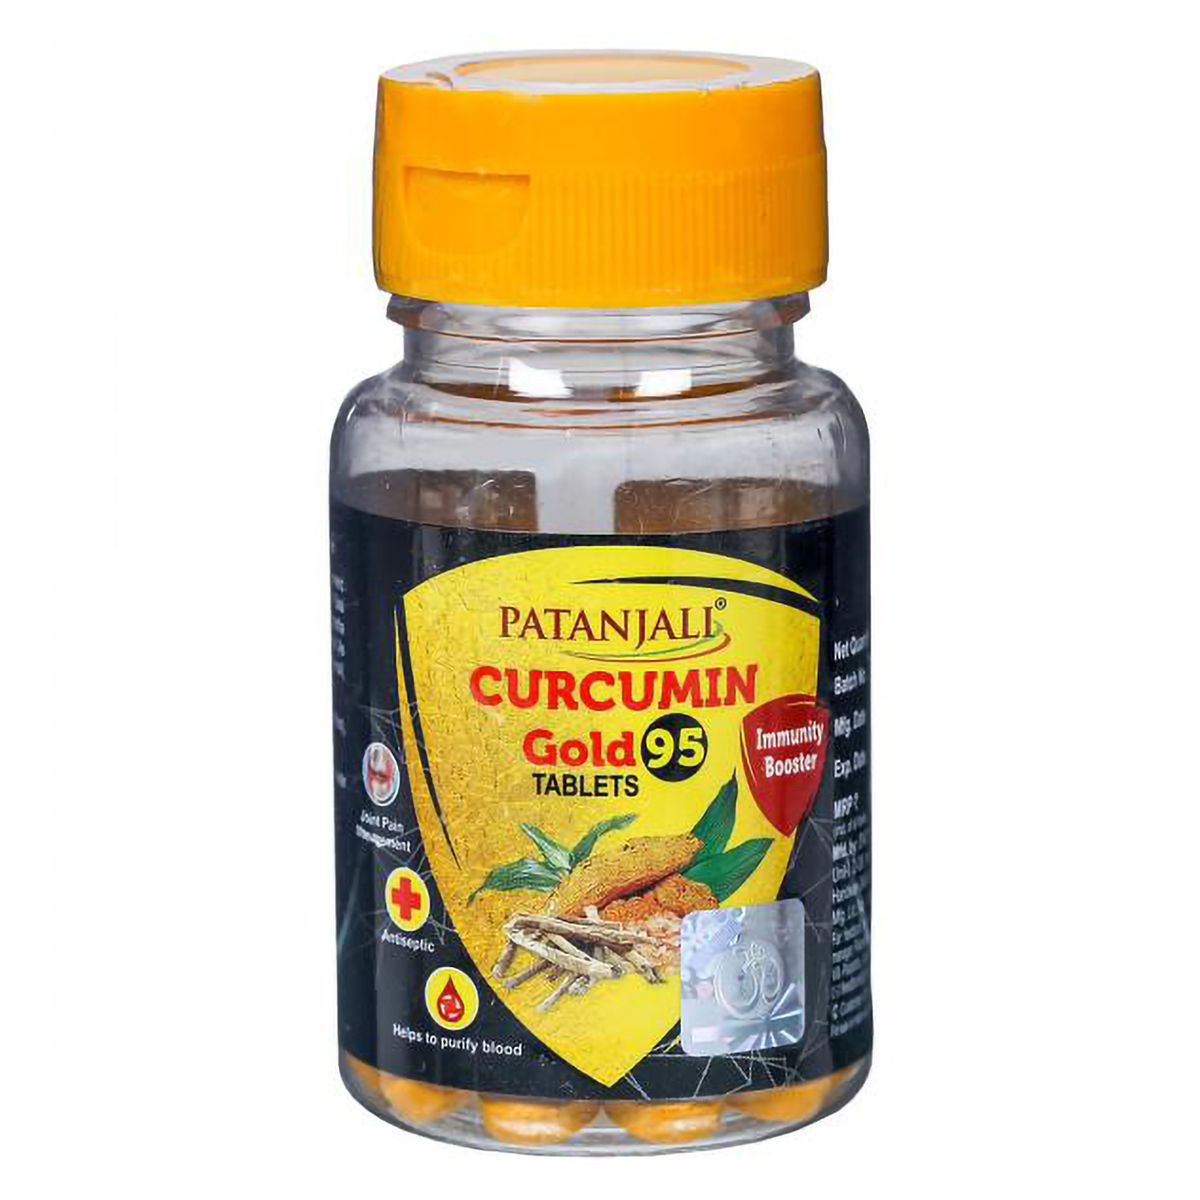 Buy Patanjali Curcumin Gold 95, 60 Tablets Online